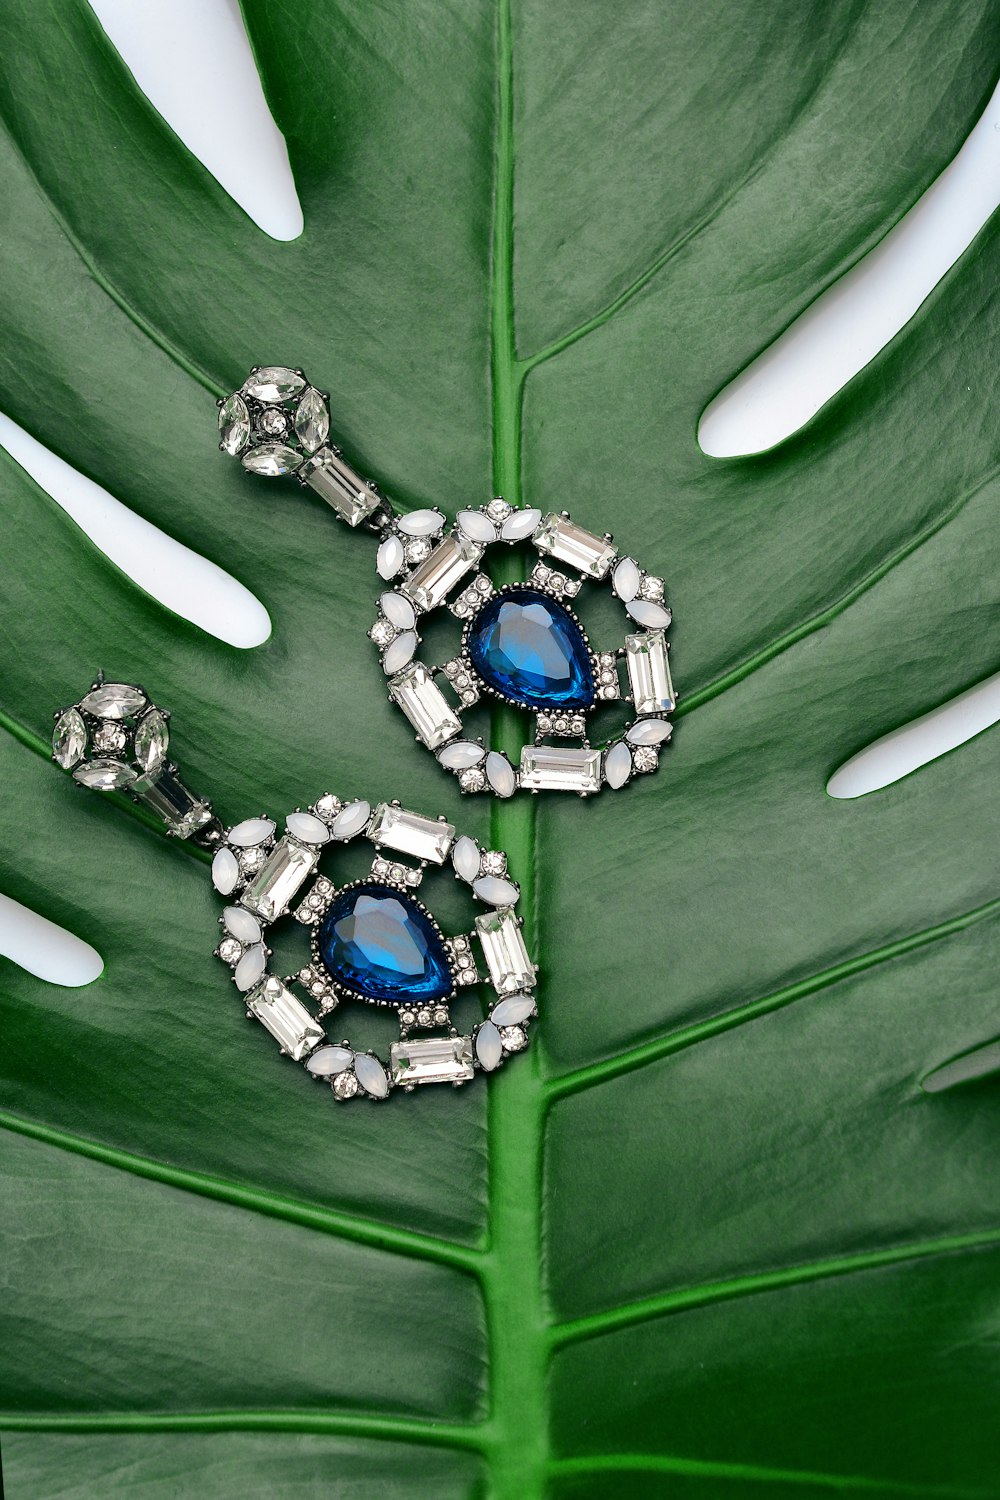 pair of silver-colored earrings with blue gemstone